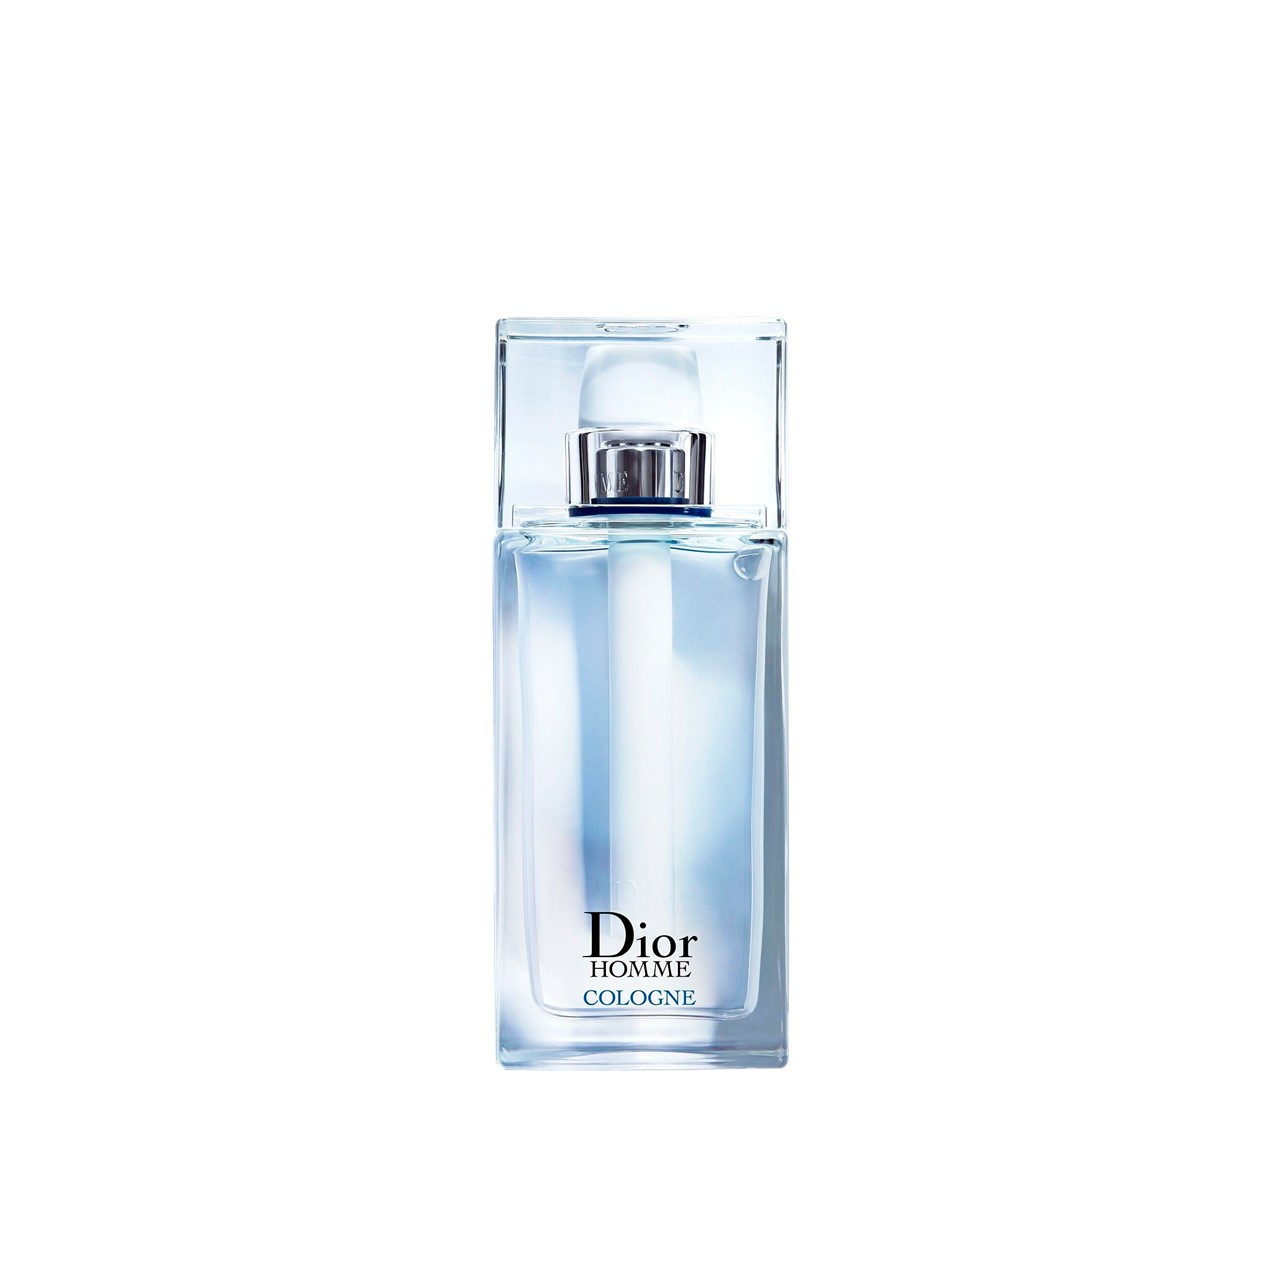 Dior Homme Cologne 125ml